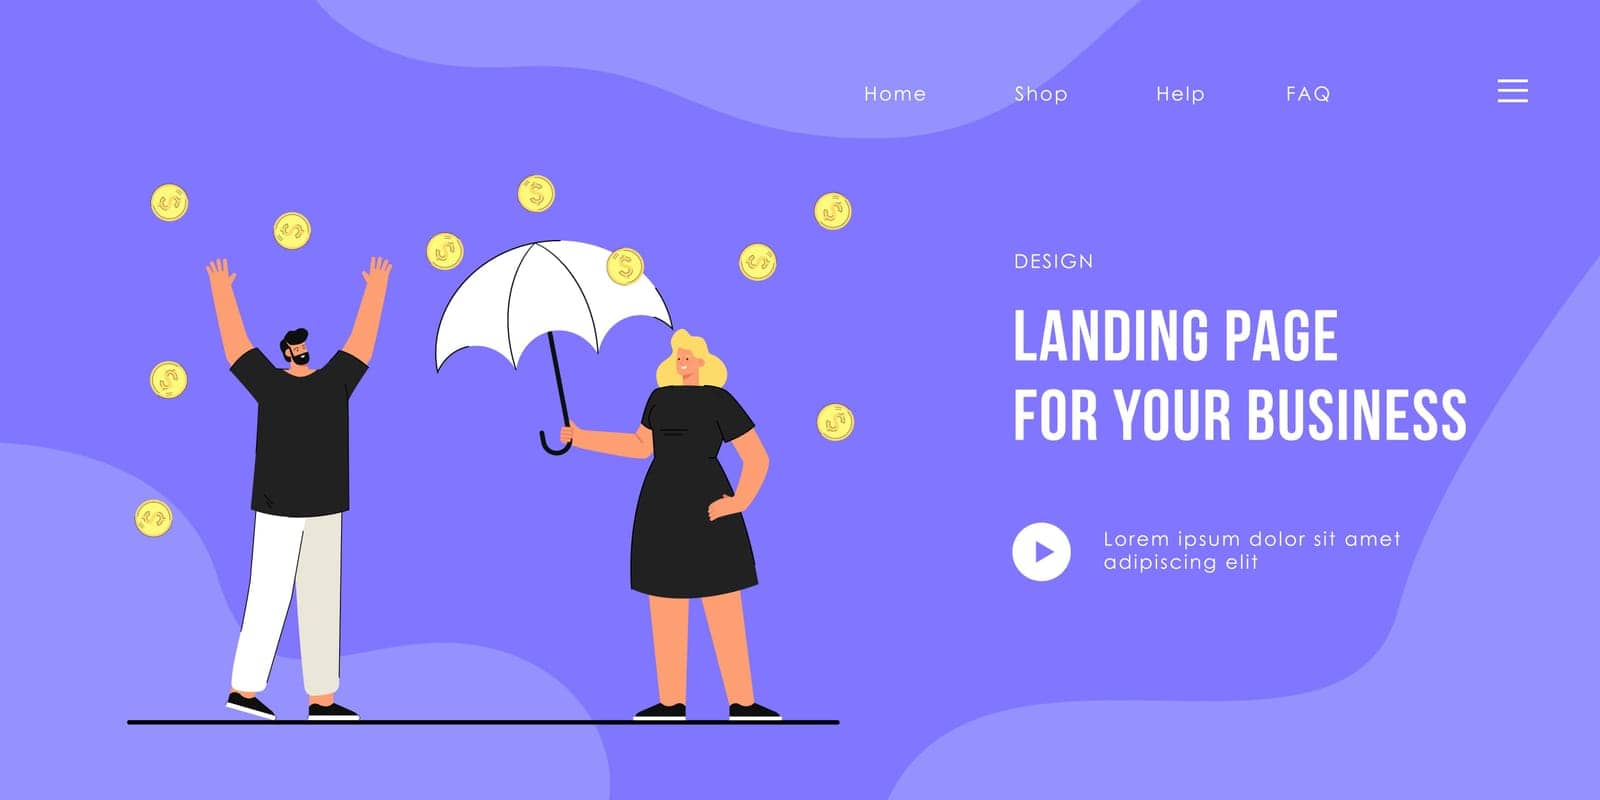 Couple under money rain. Male and female characters cheering under shower of coins. Female holding umbrella. Investment, passive income concept for banner, website design, landing web page